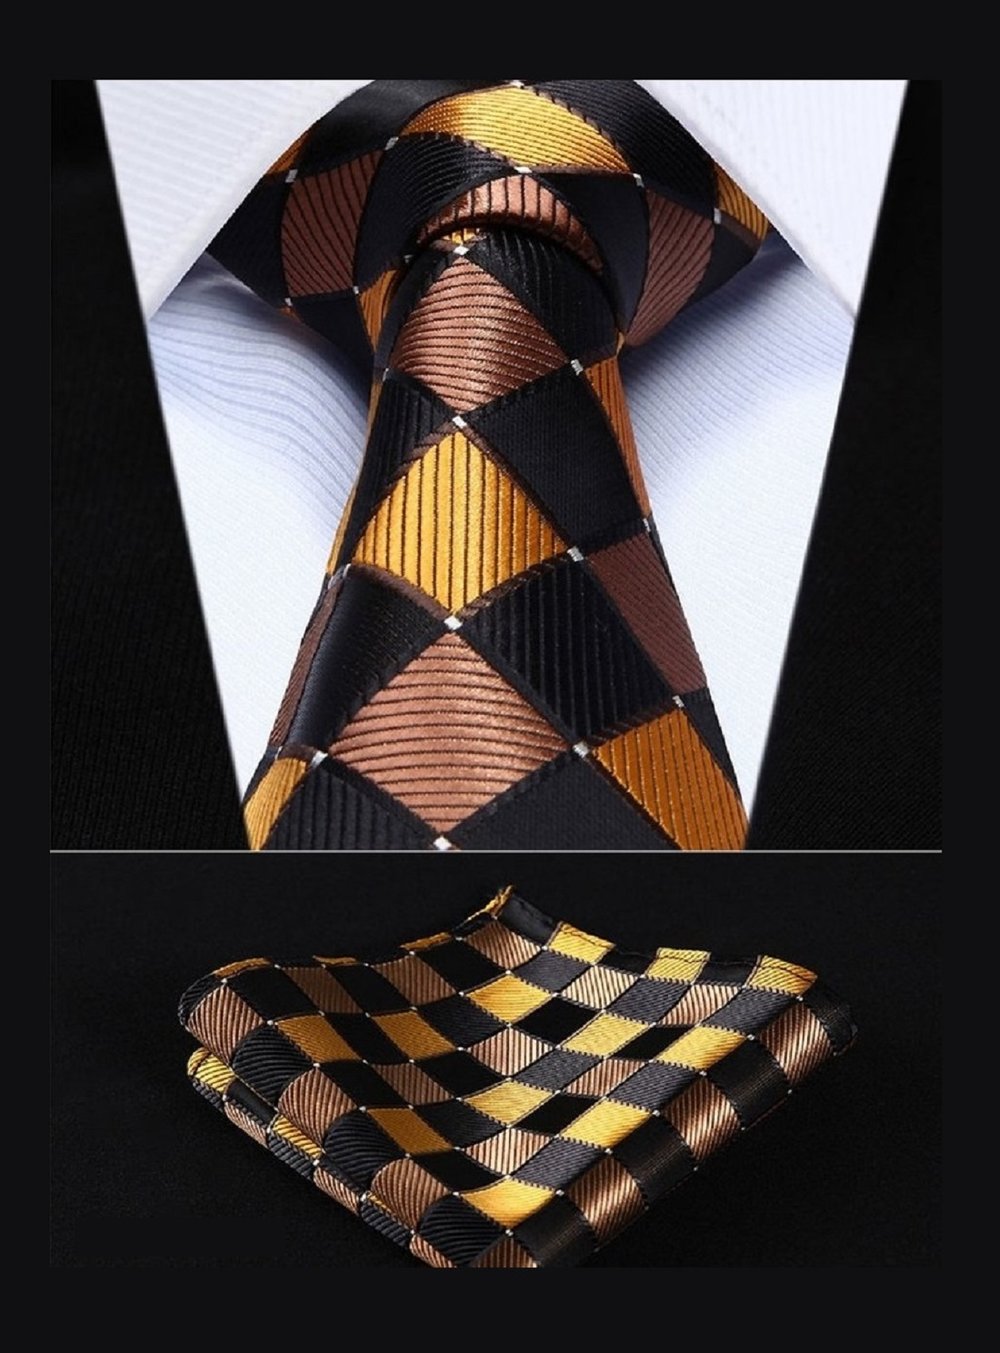 A Gold, Brown, Black Geometric Check Pattern Necktie With Matching Pocket Square and Cuff-links